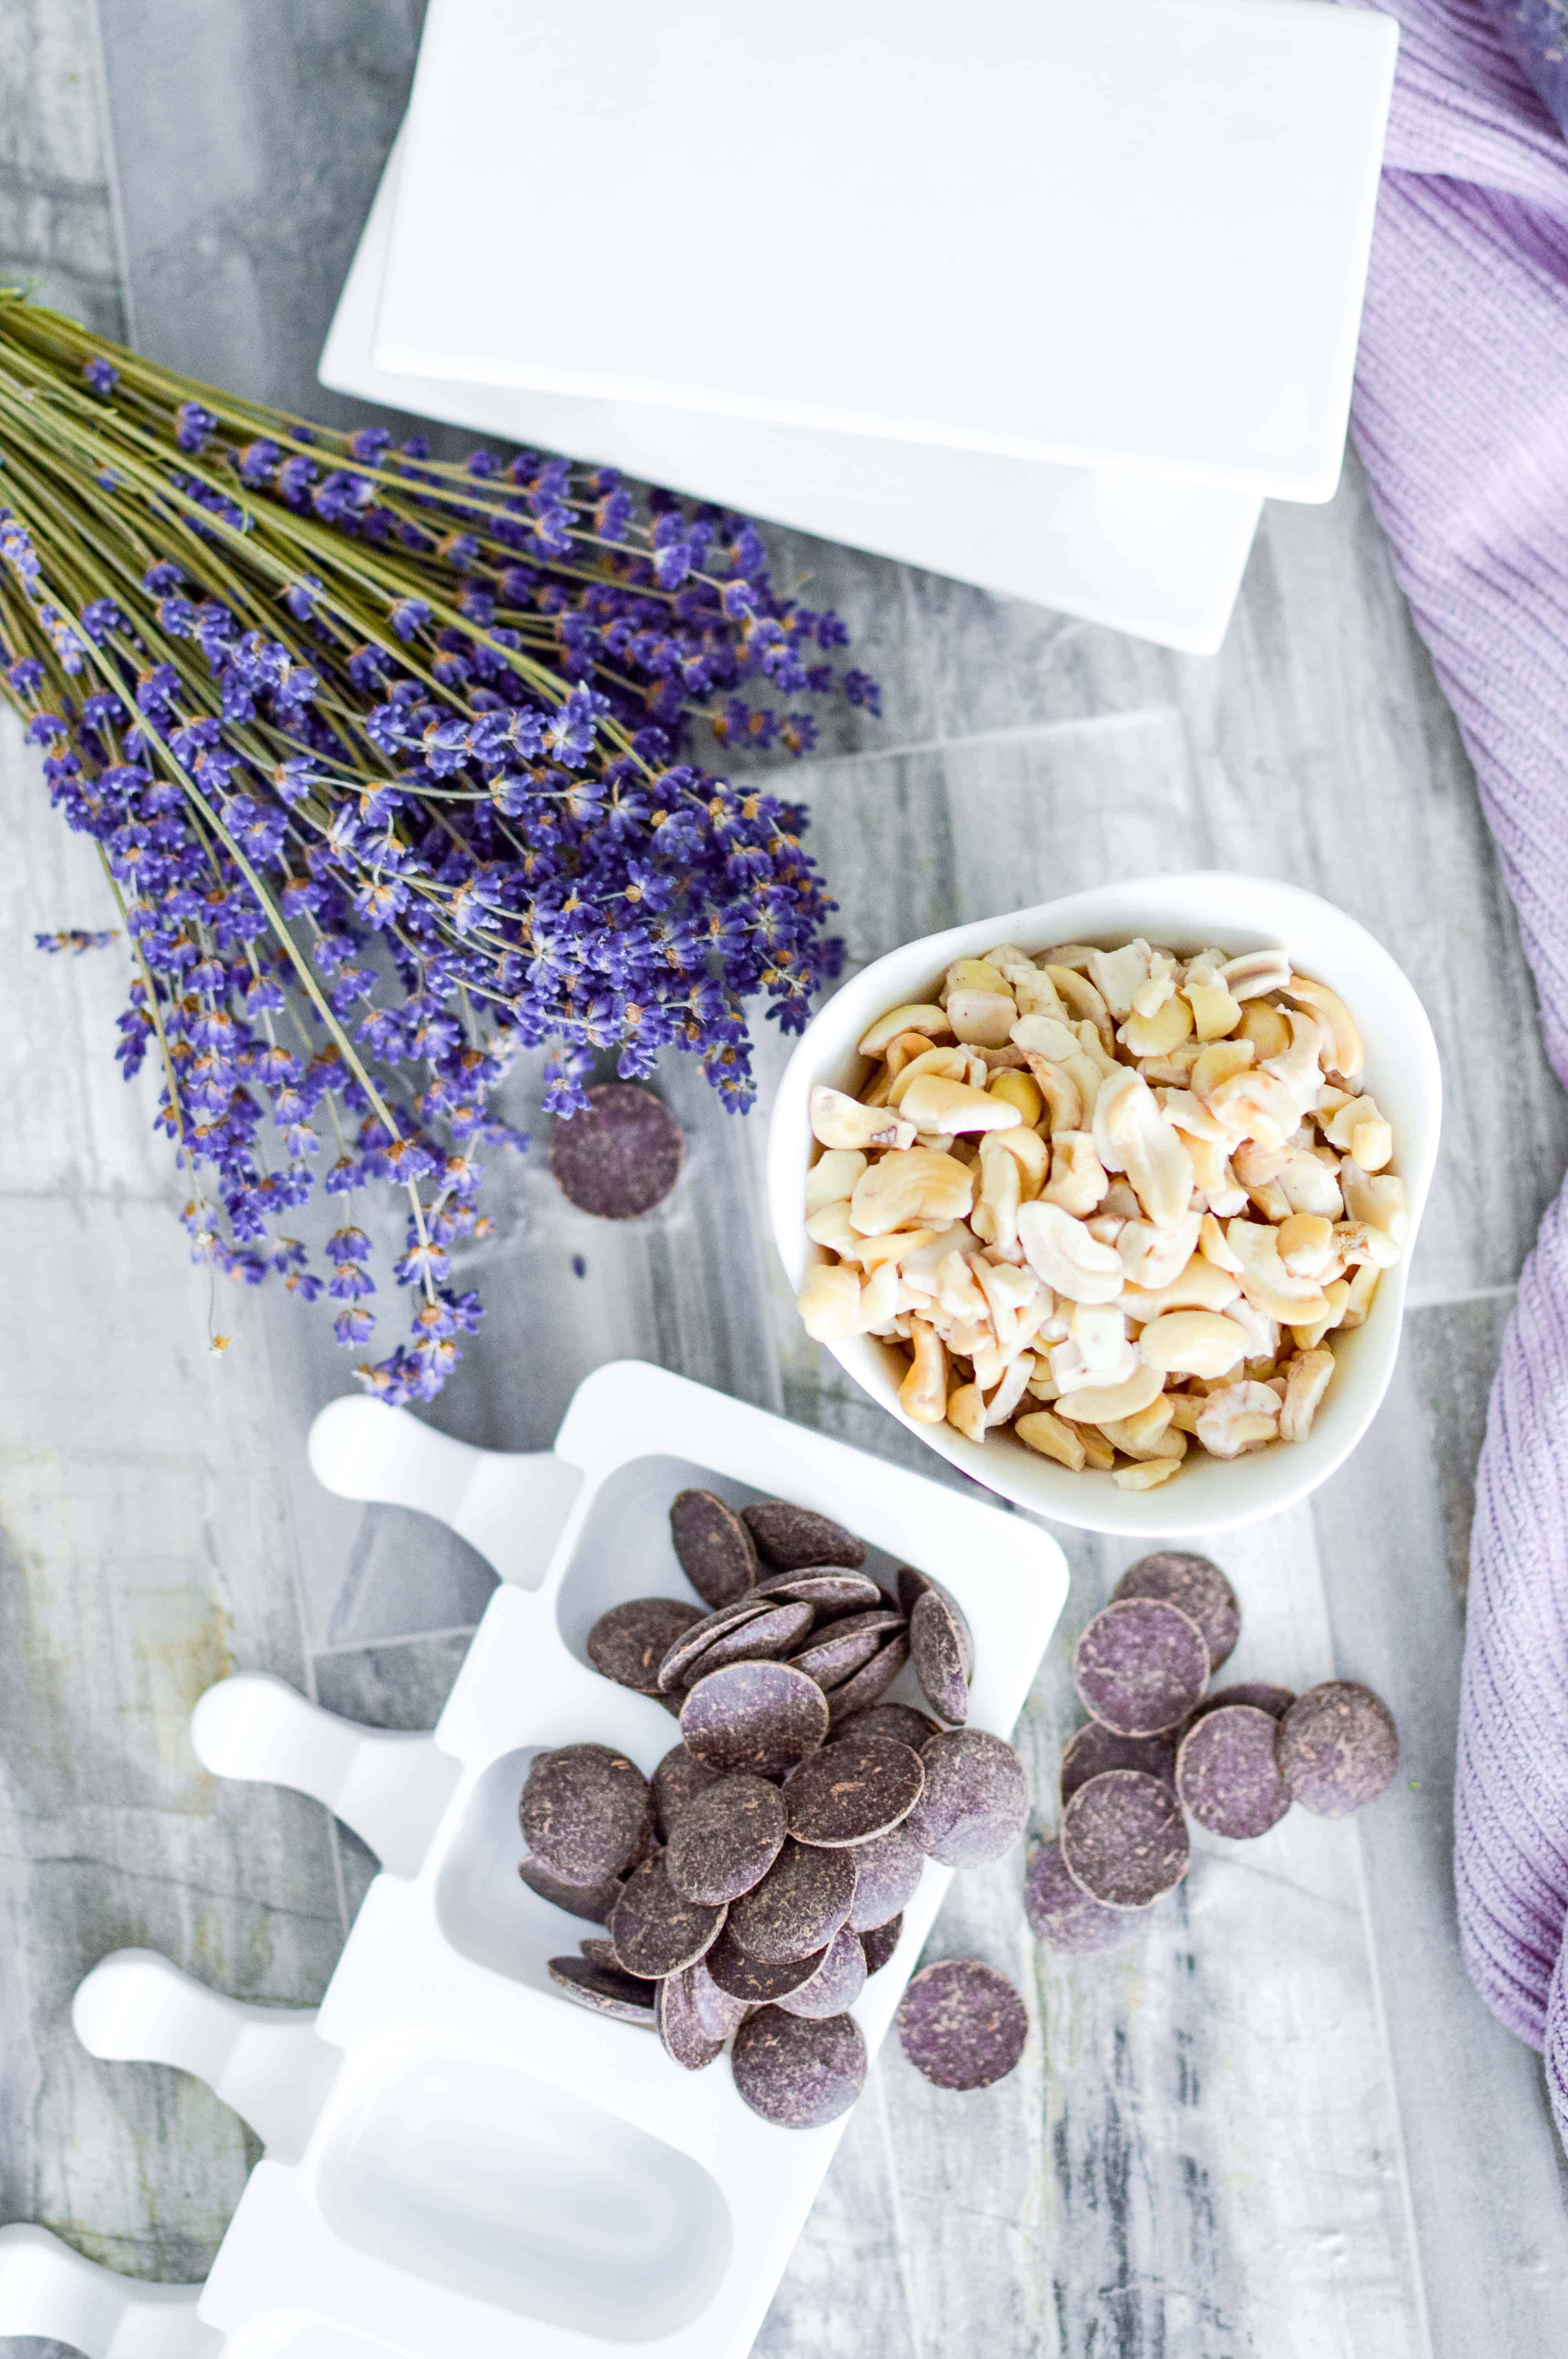 Flat lay of ingredients for making ice cream bars - lavender, cashews, and chocolate wafers.